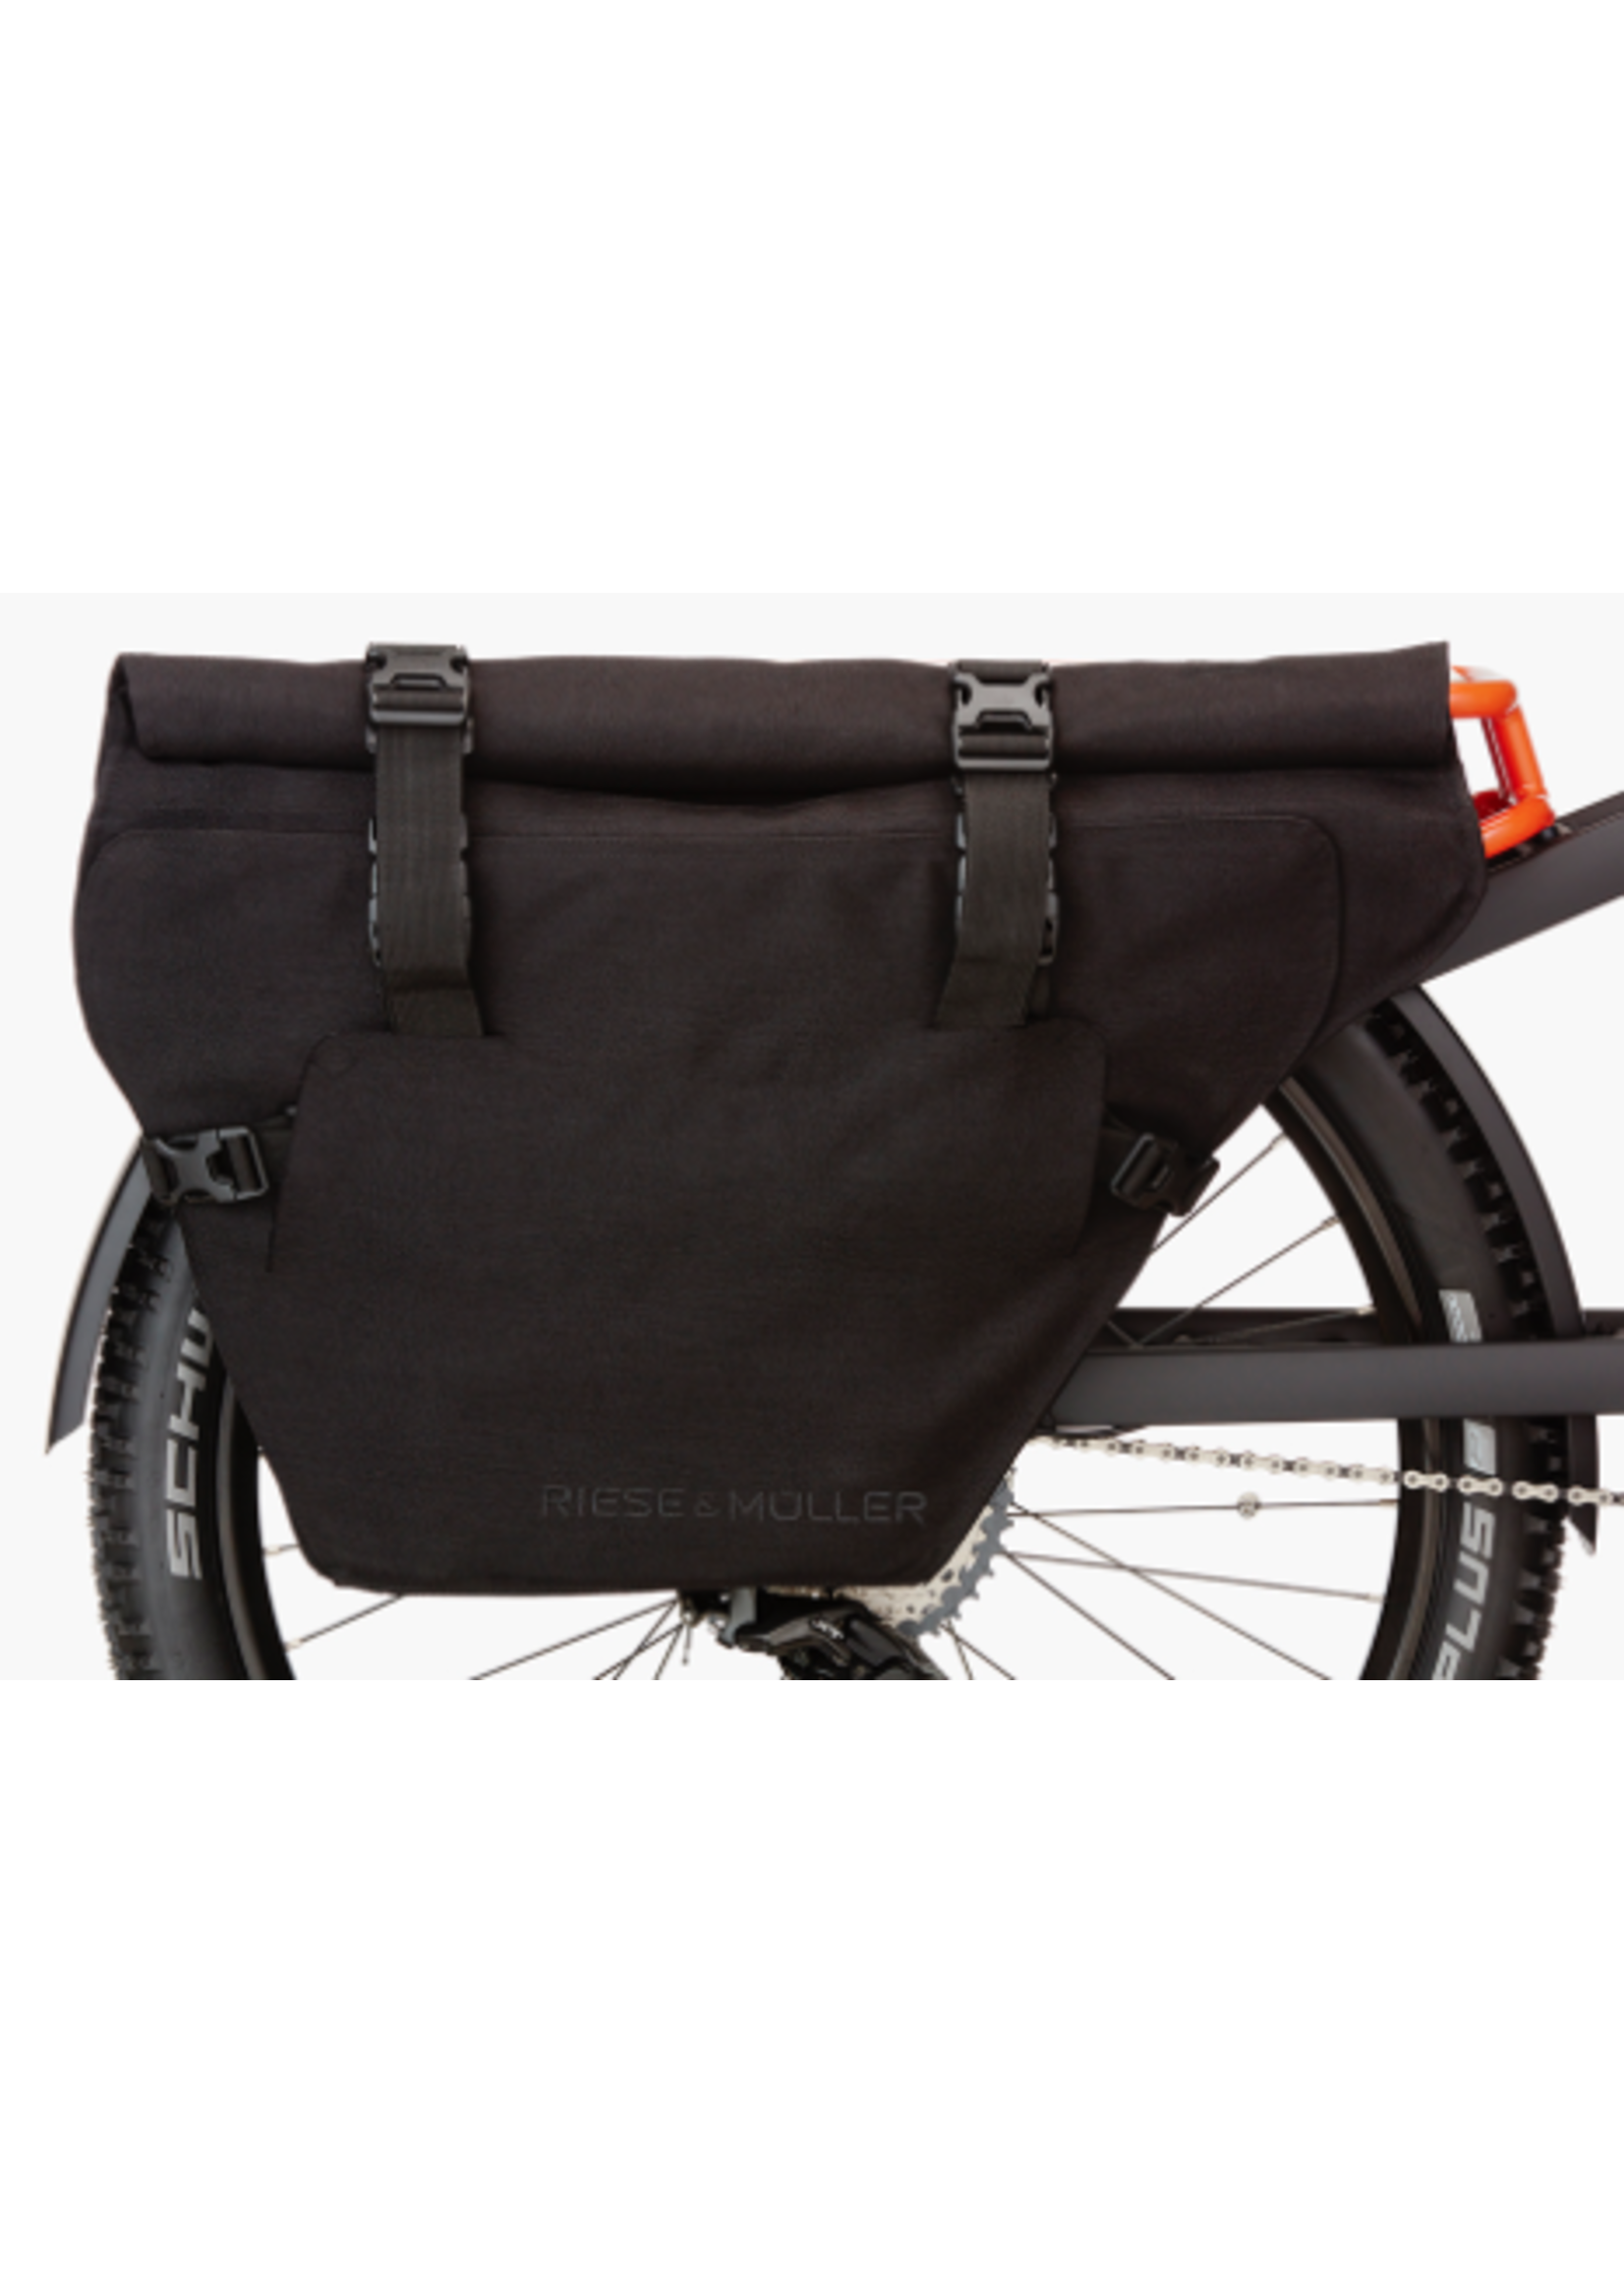 RIESE & MÜLLER Riese & Müller - Multicharger Cargo Bags 2020